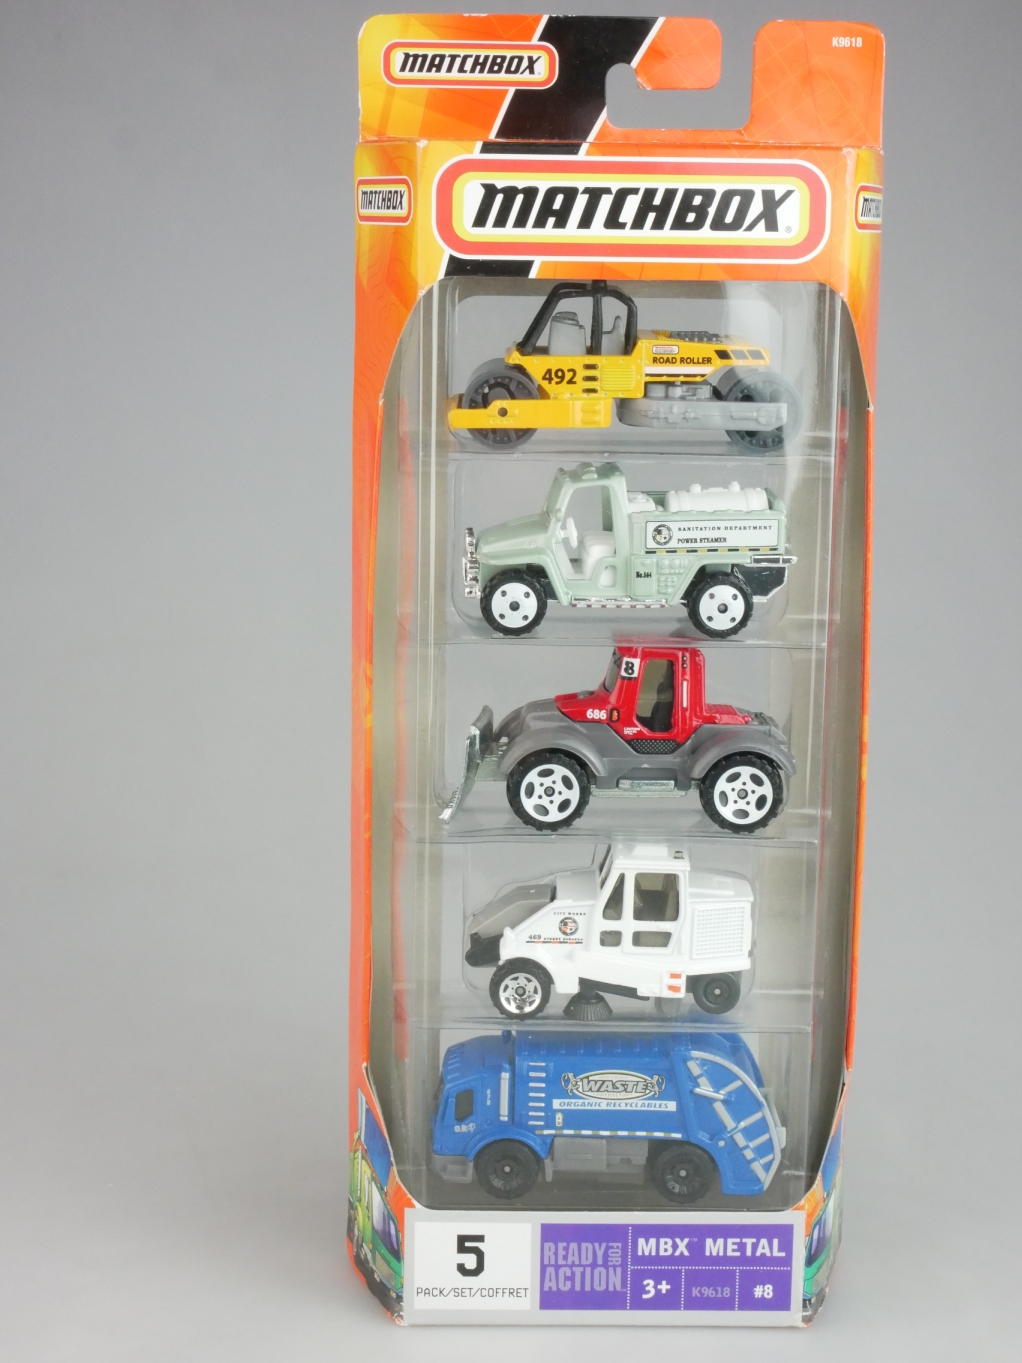 5-Pack 2007 # 08 Road Services - 19725